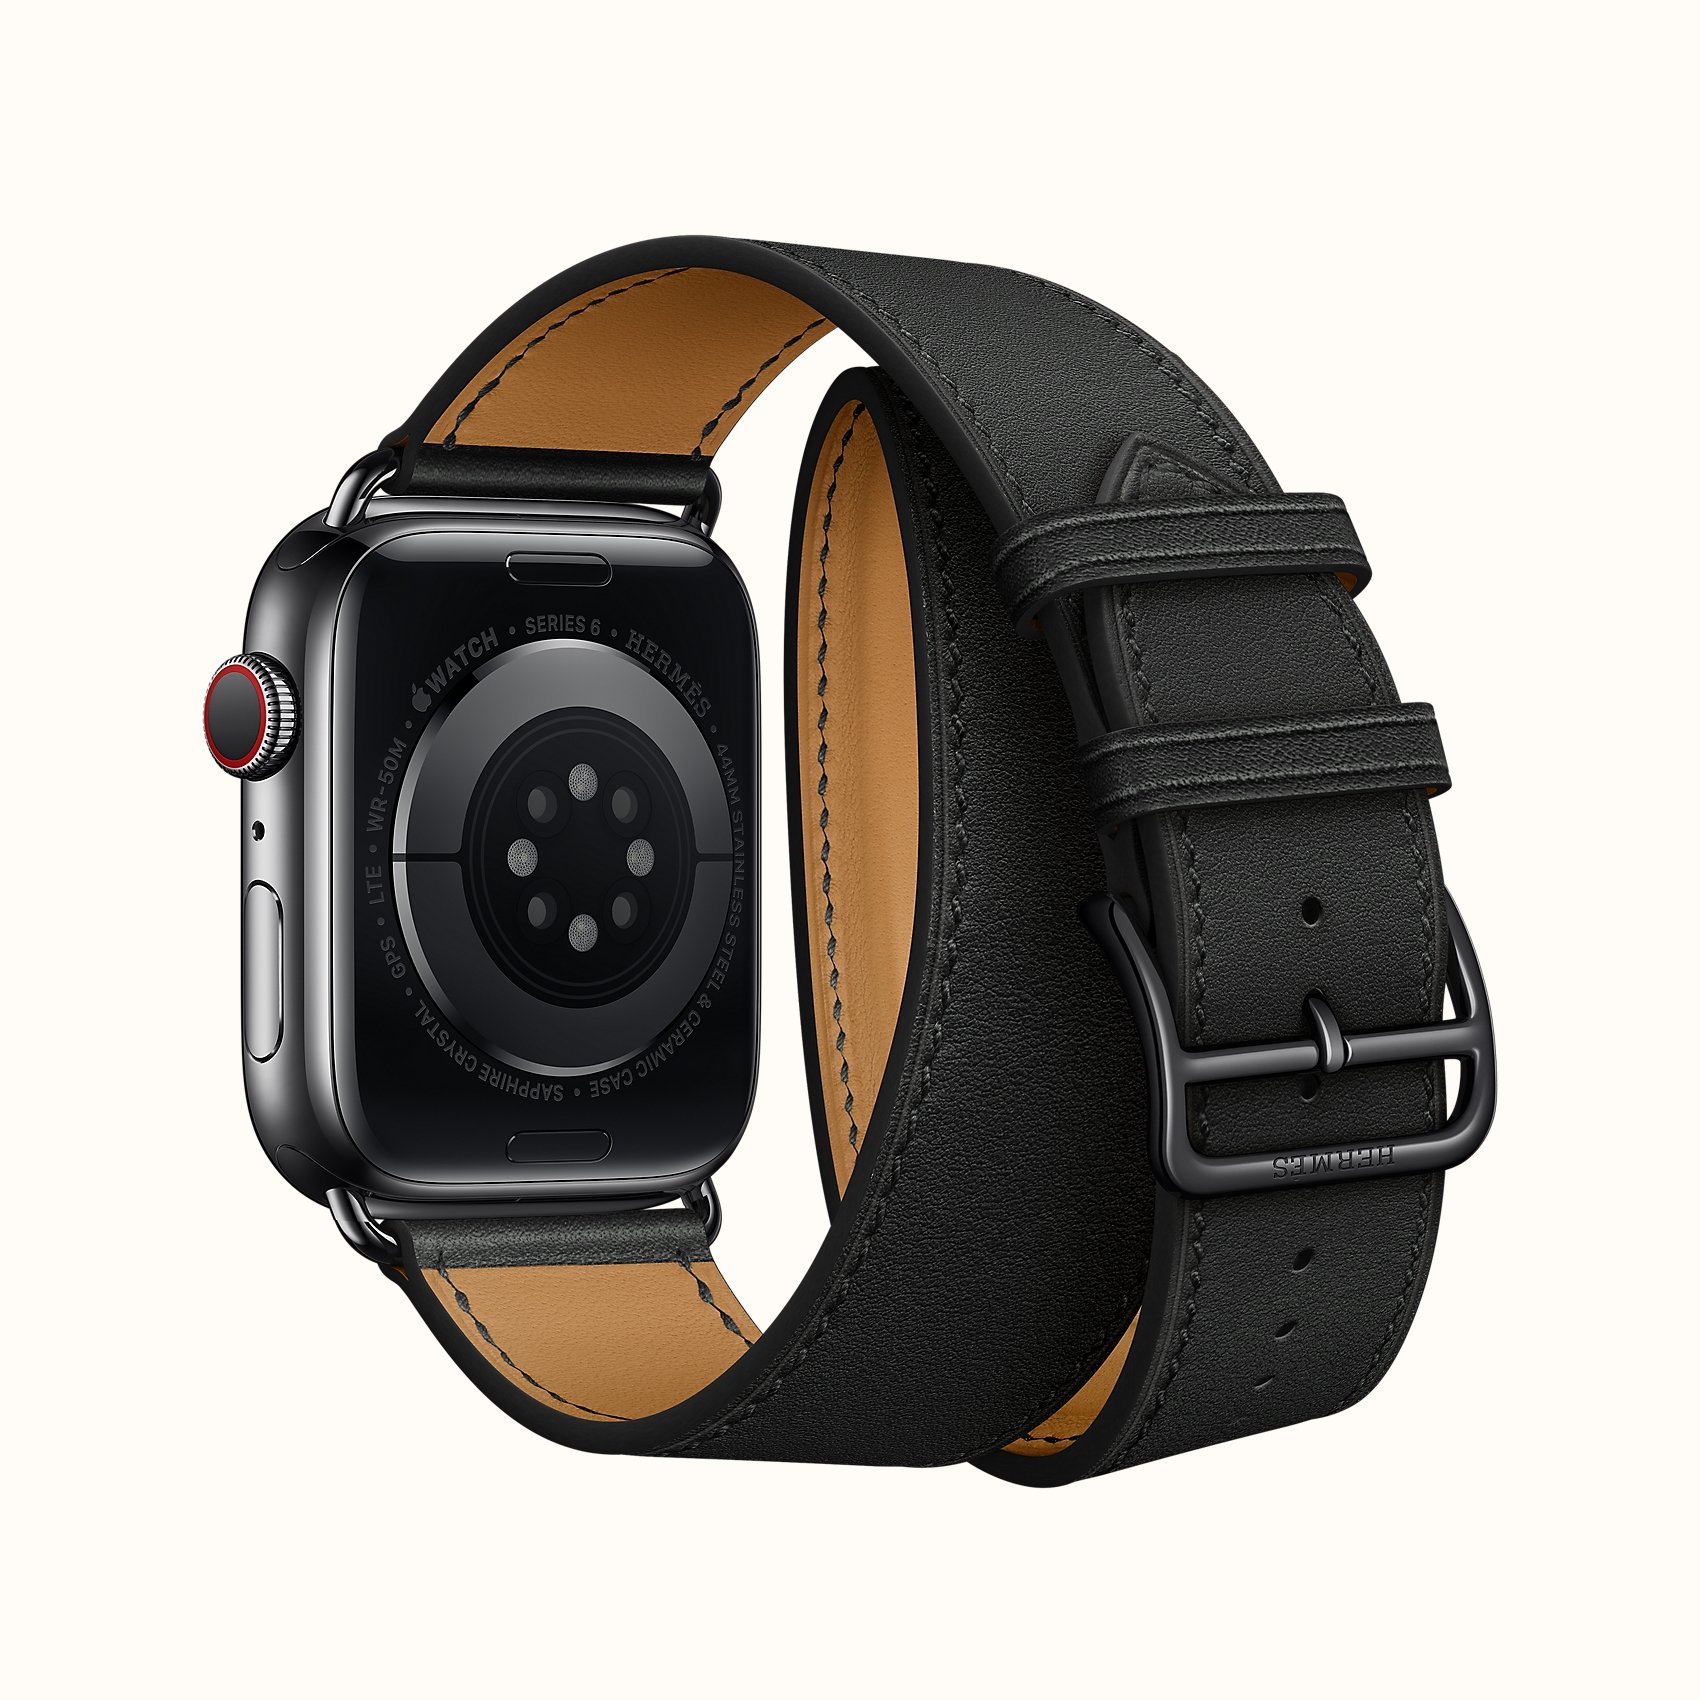 Space Black Series 6 case & Band Apple Watch Hermes Double Tour 44 mm